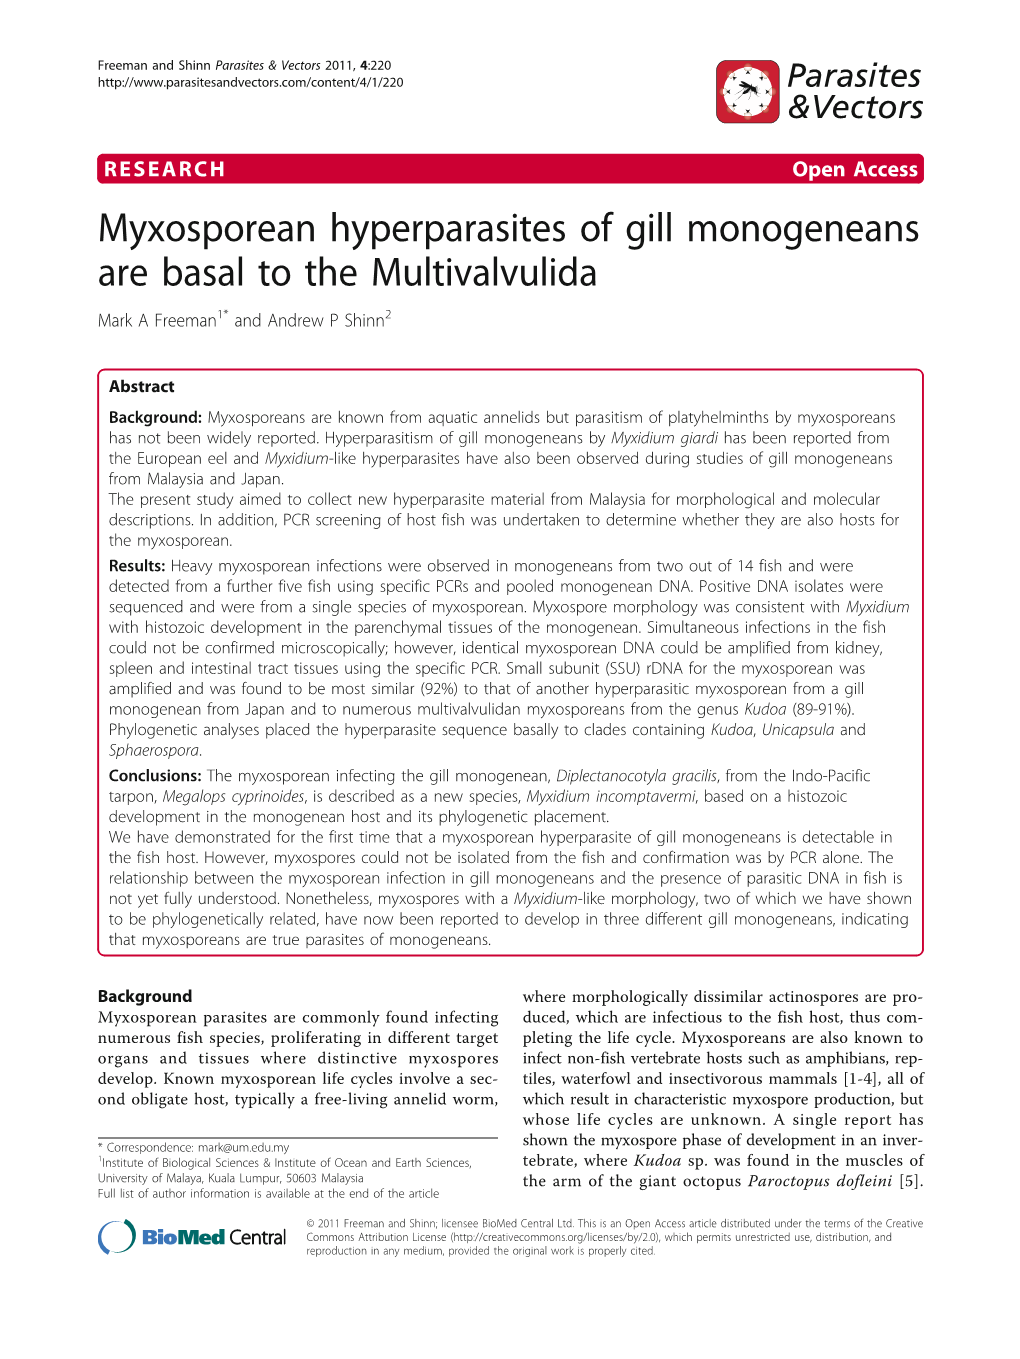 Myxosporean Hyperparasites of Gill Monogeneans Are Basal to the Multivalvulida Mark a Freeman1* and Andrew P Shinn2